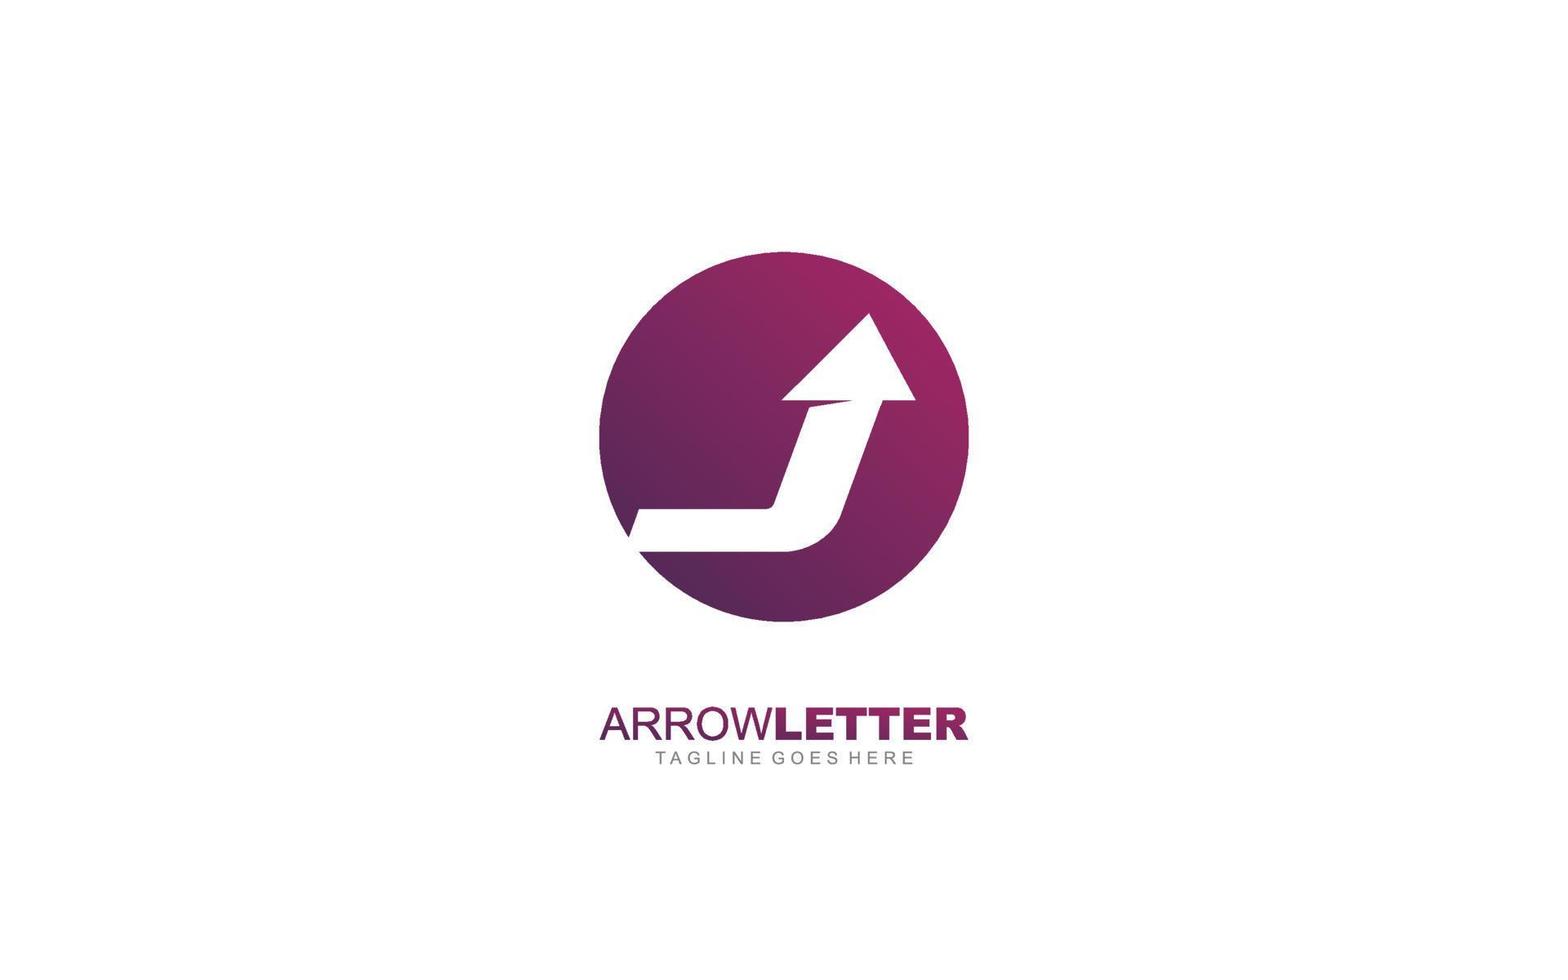 J logo business for branding company. arrow template vector illustration for your brand.